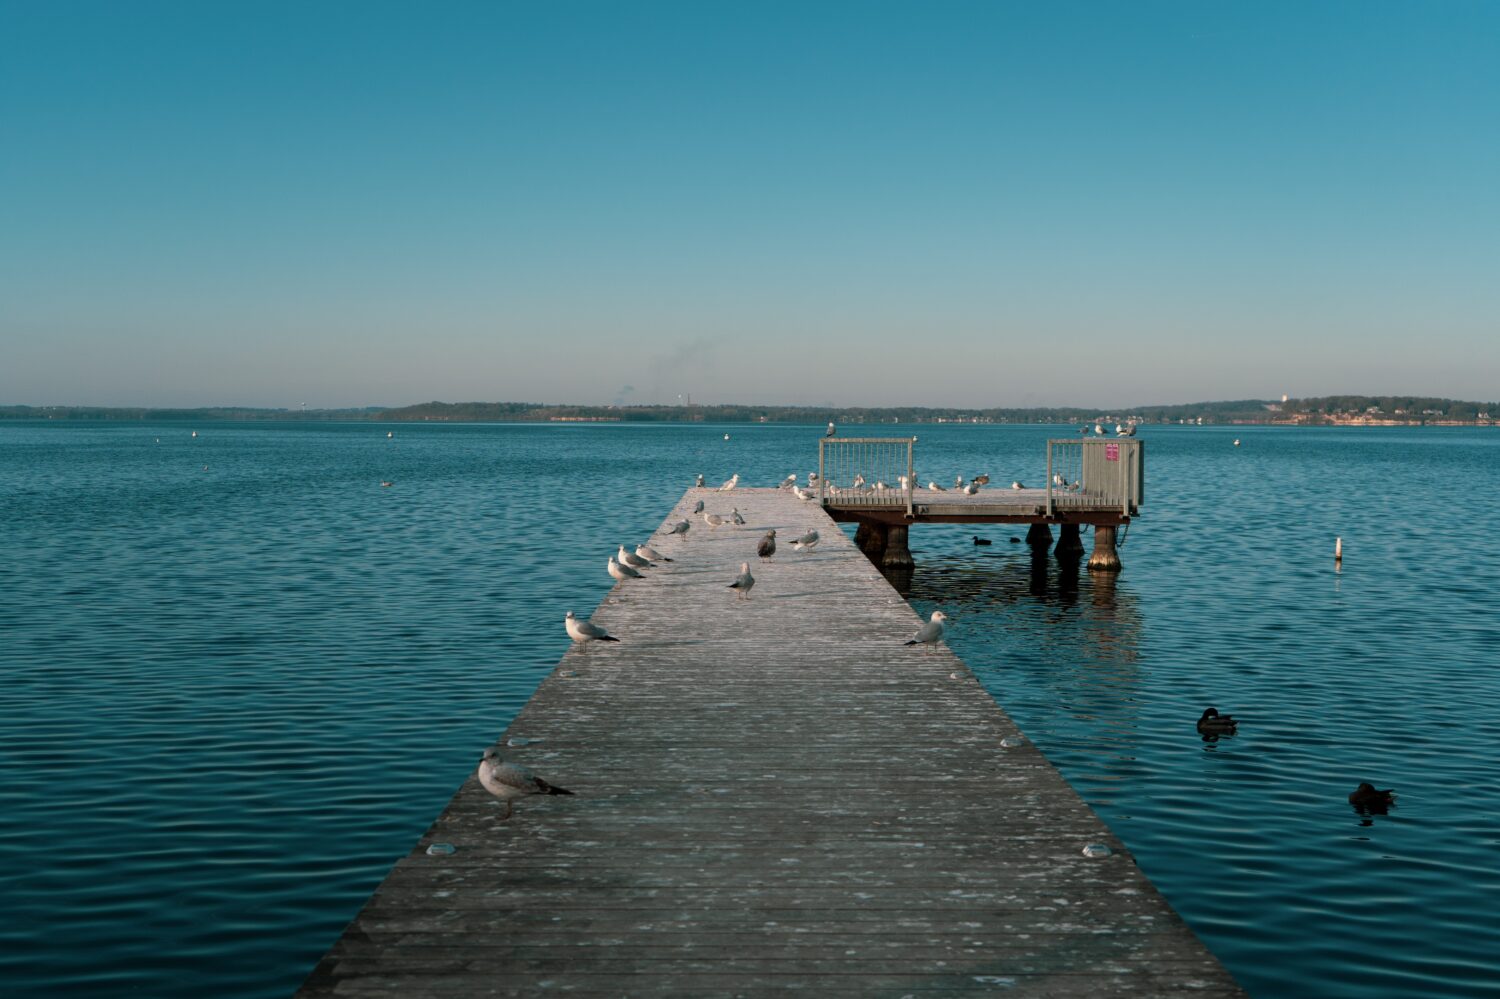 A scenic view of seagulls on a dock in Lake Mendota, Wisconsin